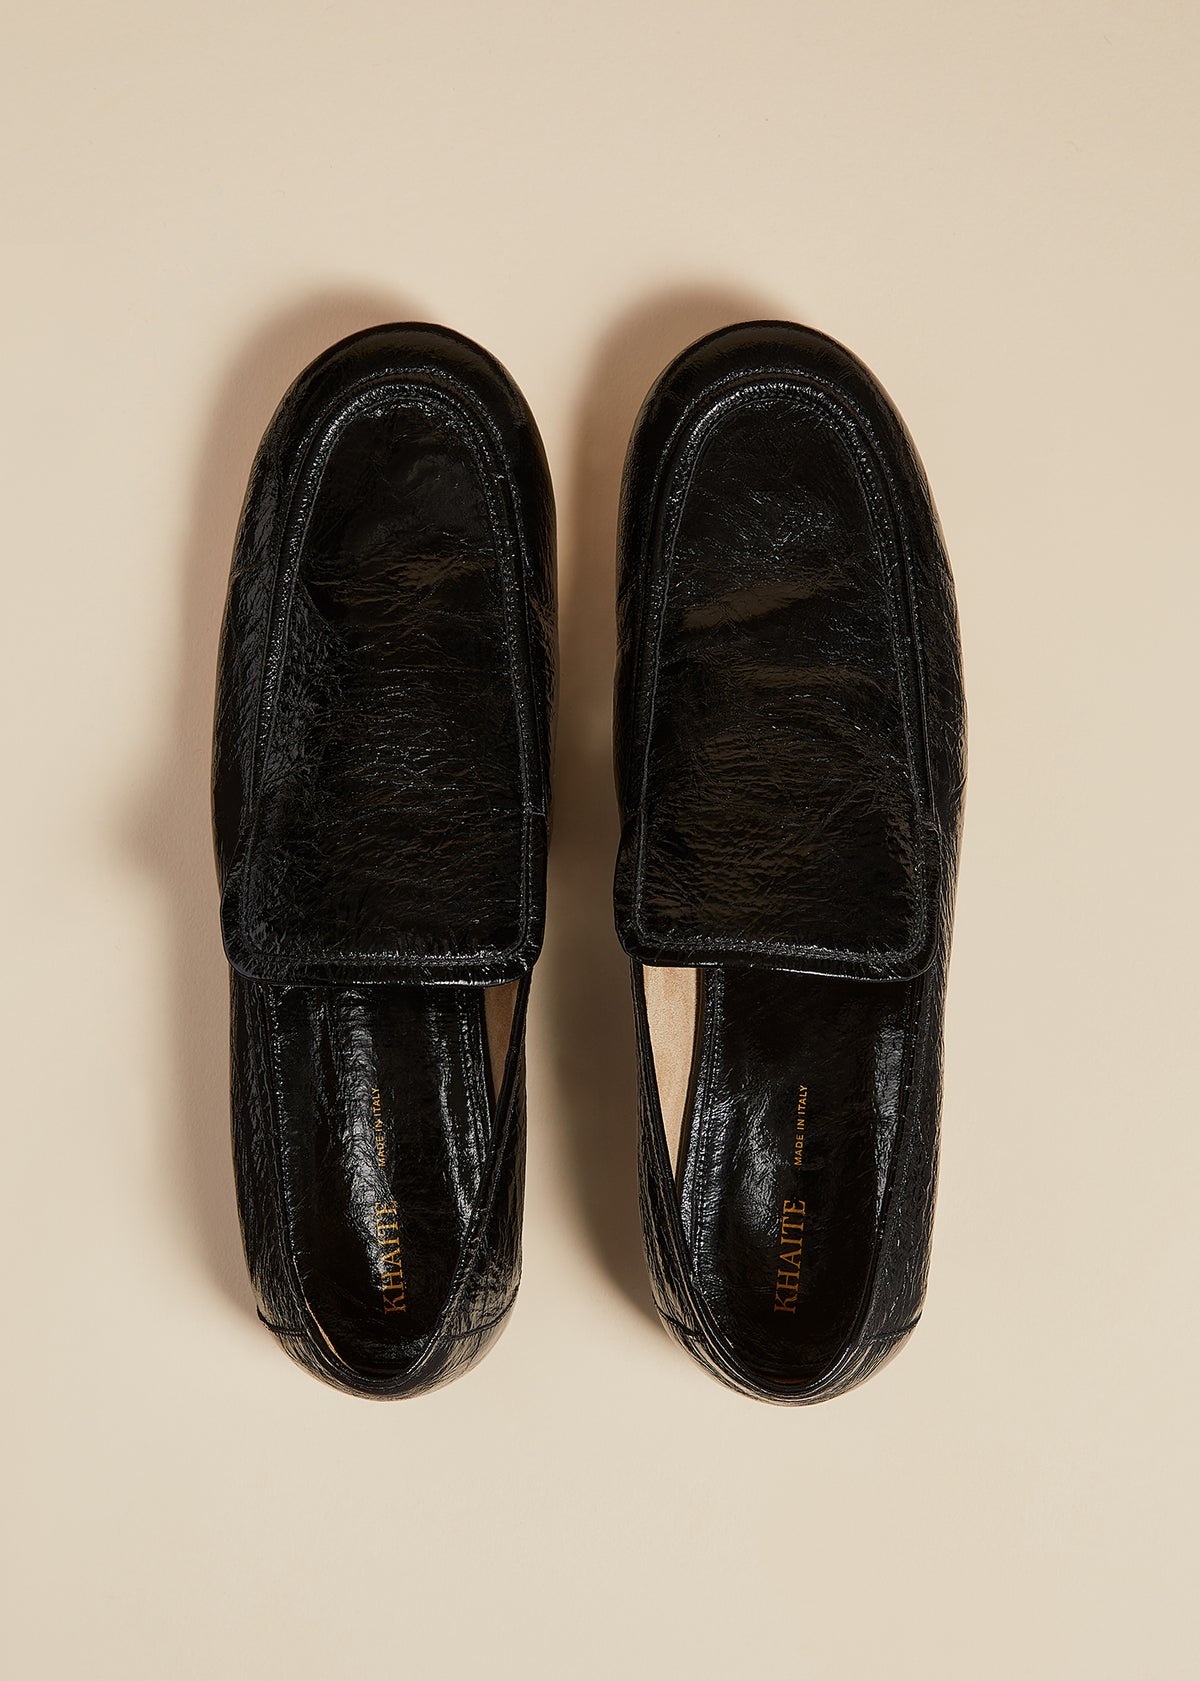 The Alessia Loafer in Black Crinkled Leather - 3